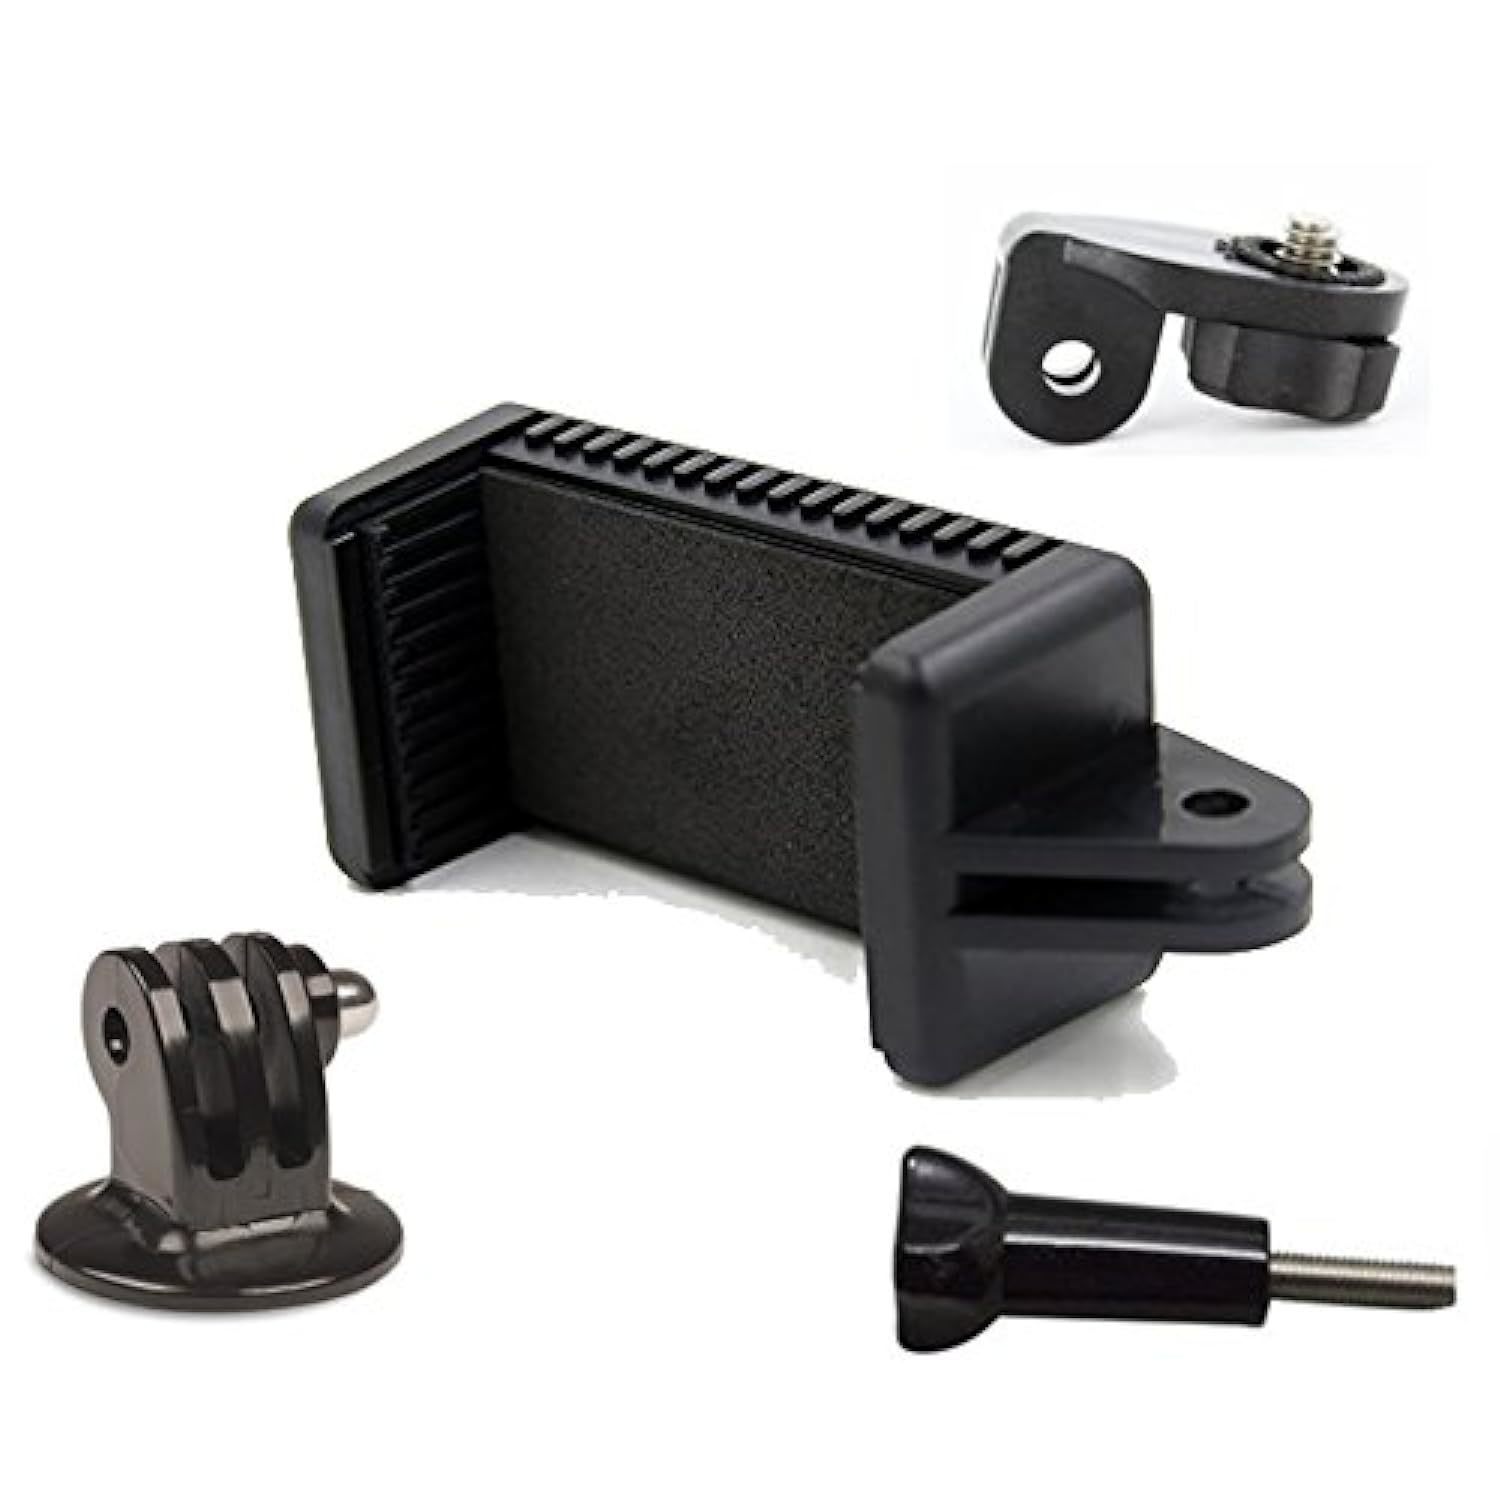 | Universal Smartphone Holder W/Gopro Style Mount Attachment, Tripod Adapter & S - $20.99